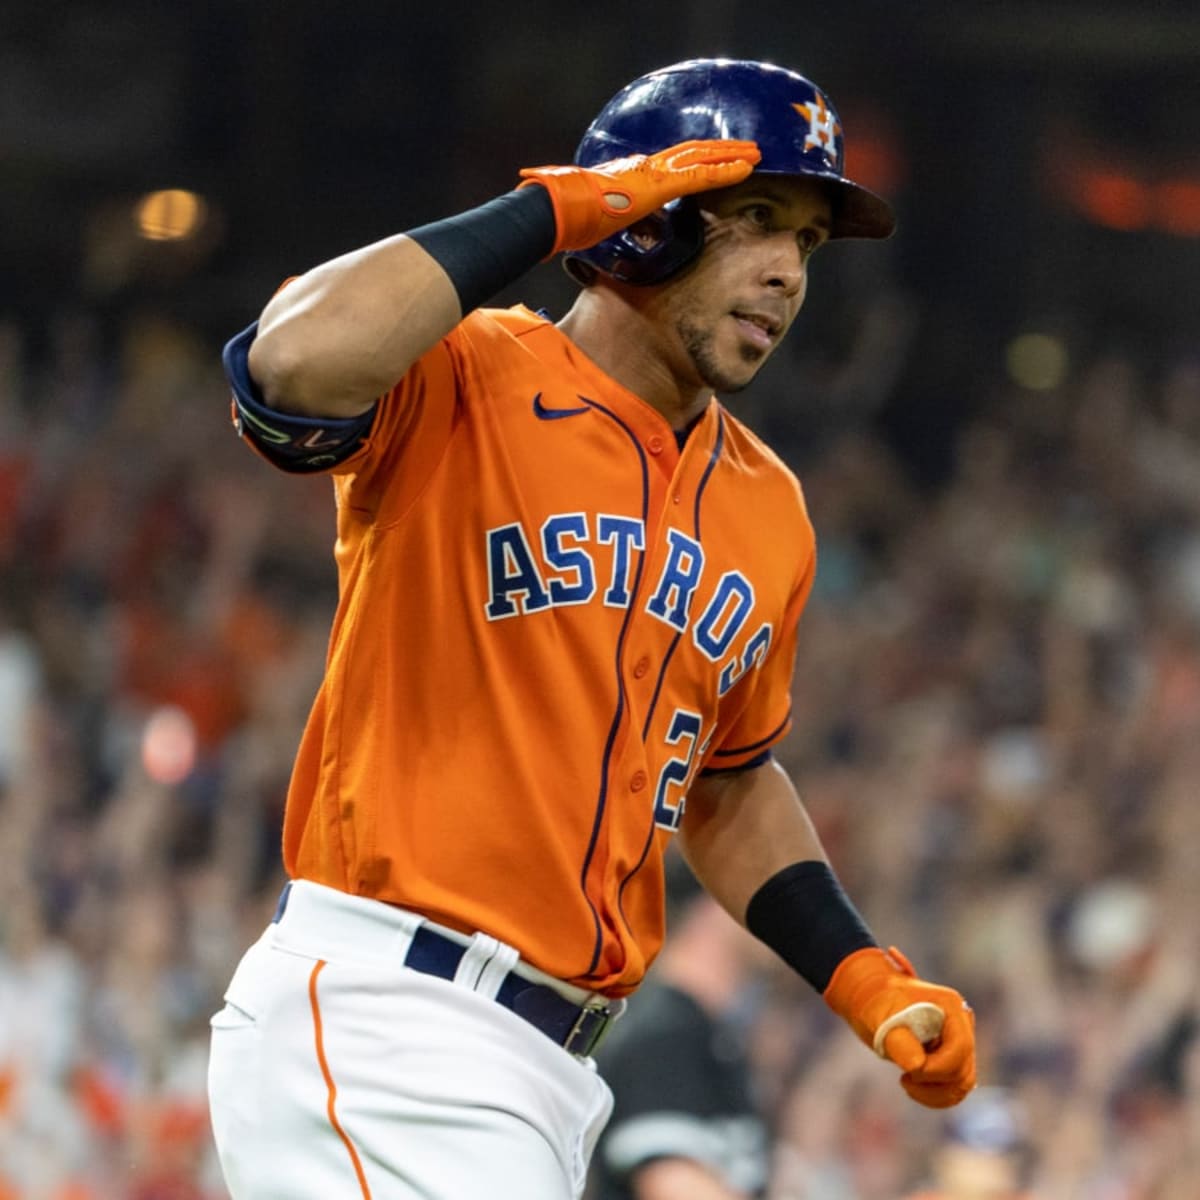 Brantley returns to Astros after missing 14 months with shoulder injury